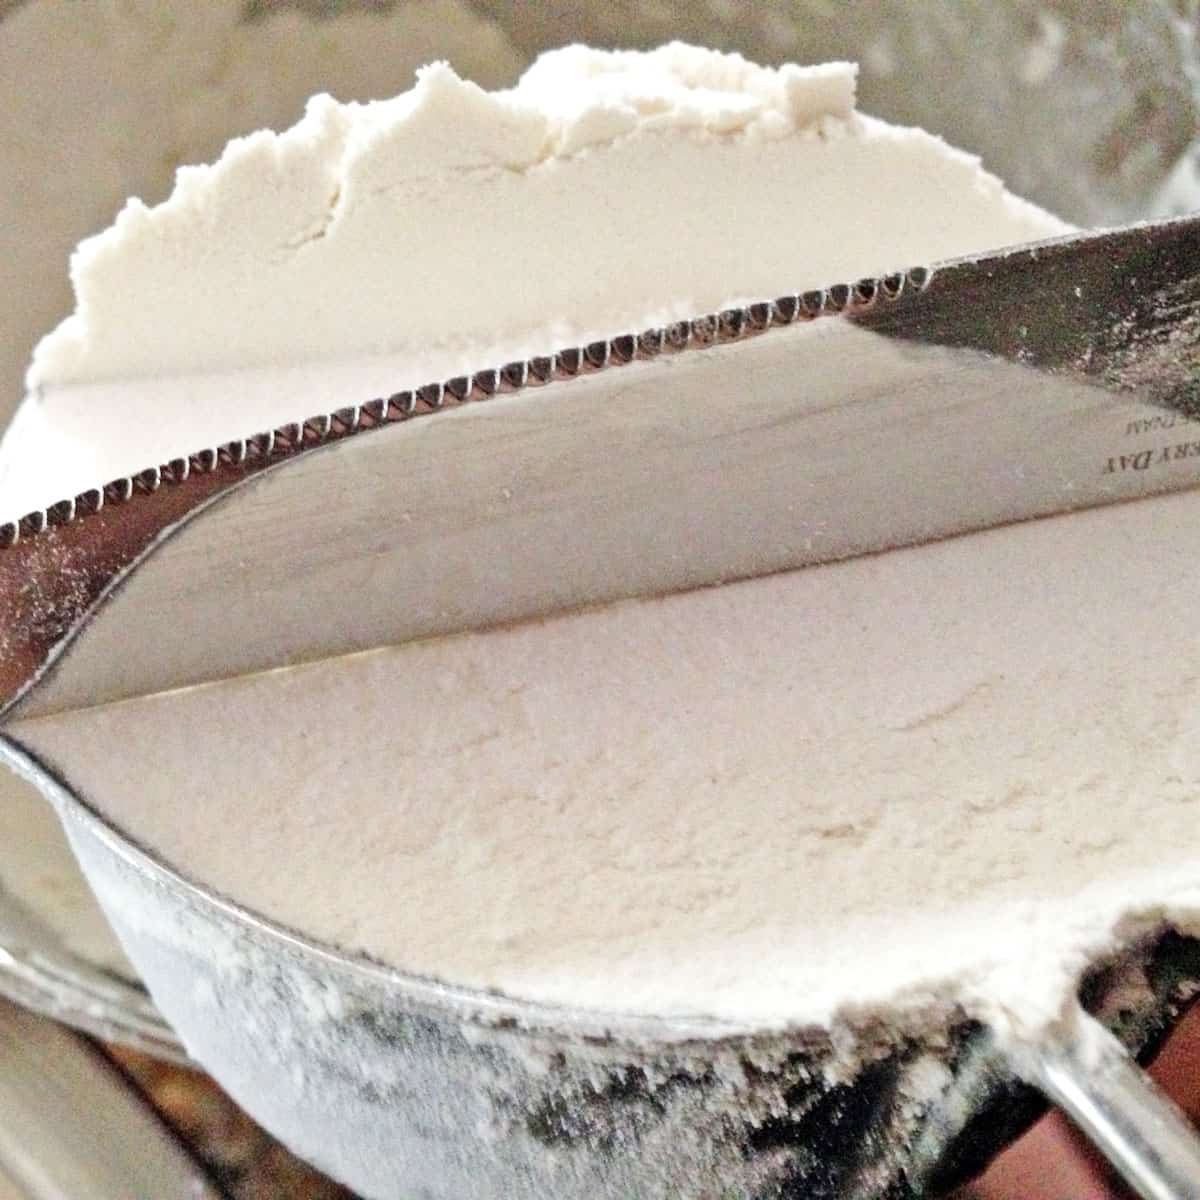 Measuring flour in a measuring a cup and leveling it off with a table knife.